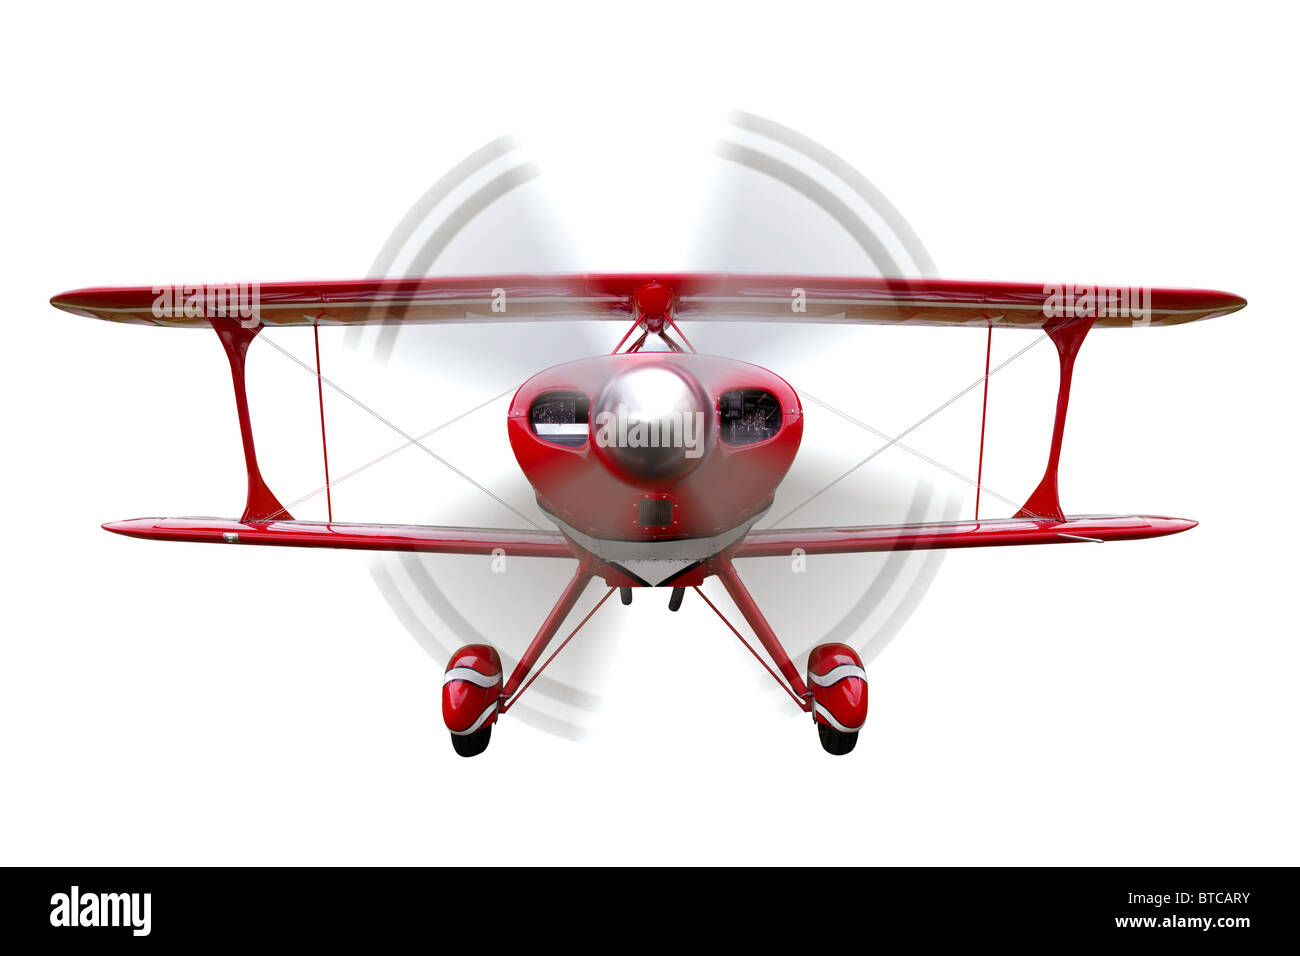 A red biplane, front view with propeller in motion, isolated on a white background. Stock Photo